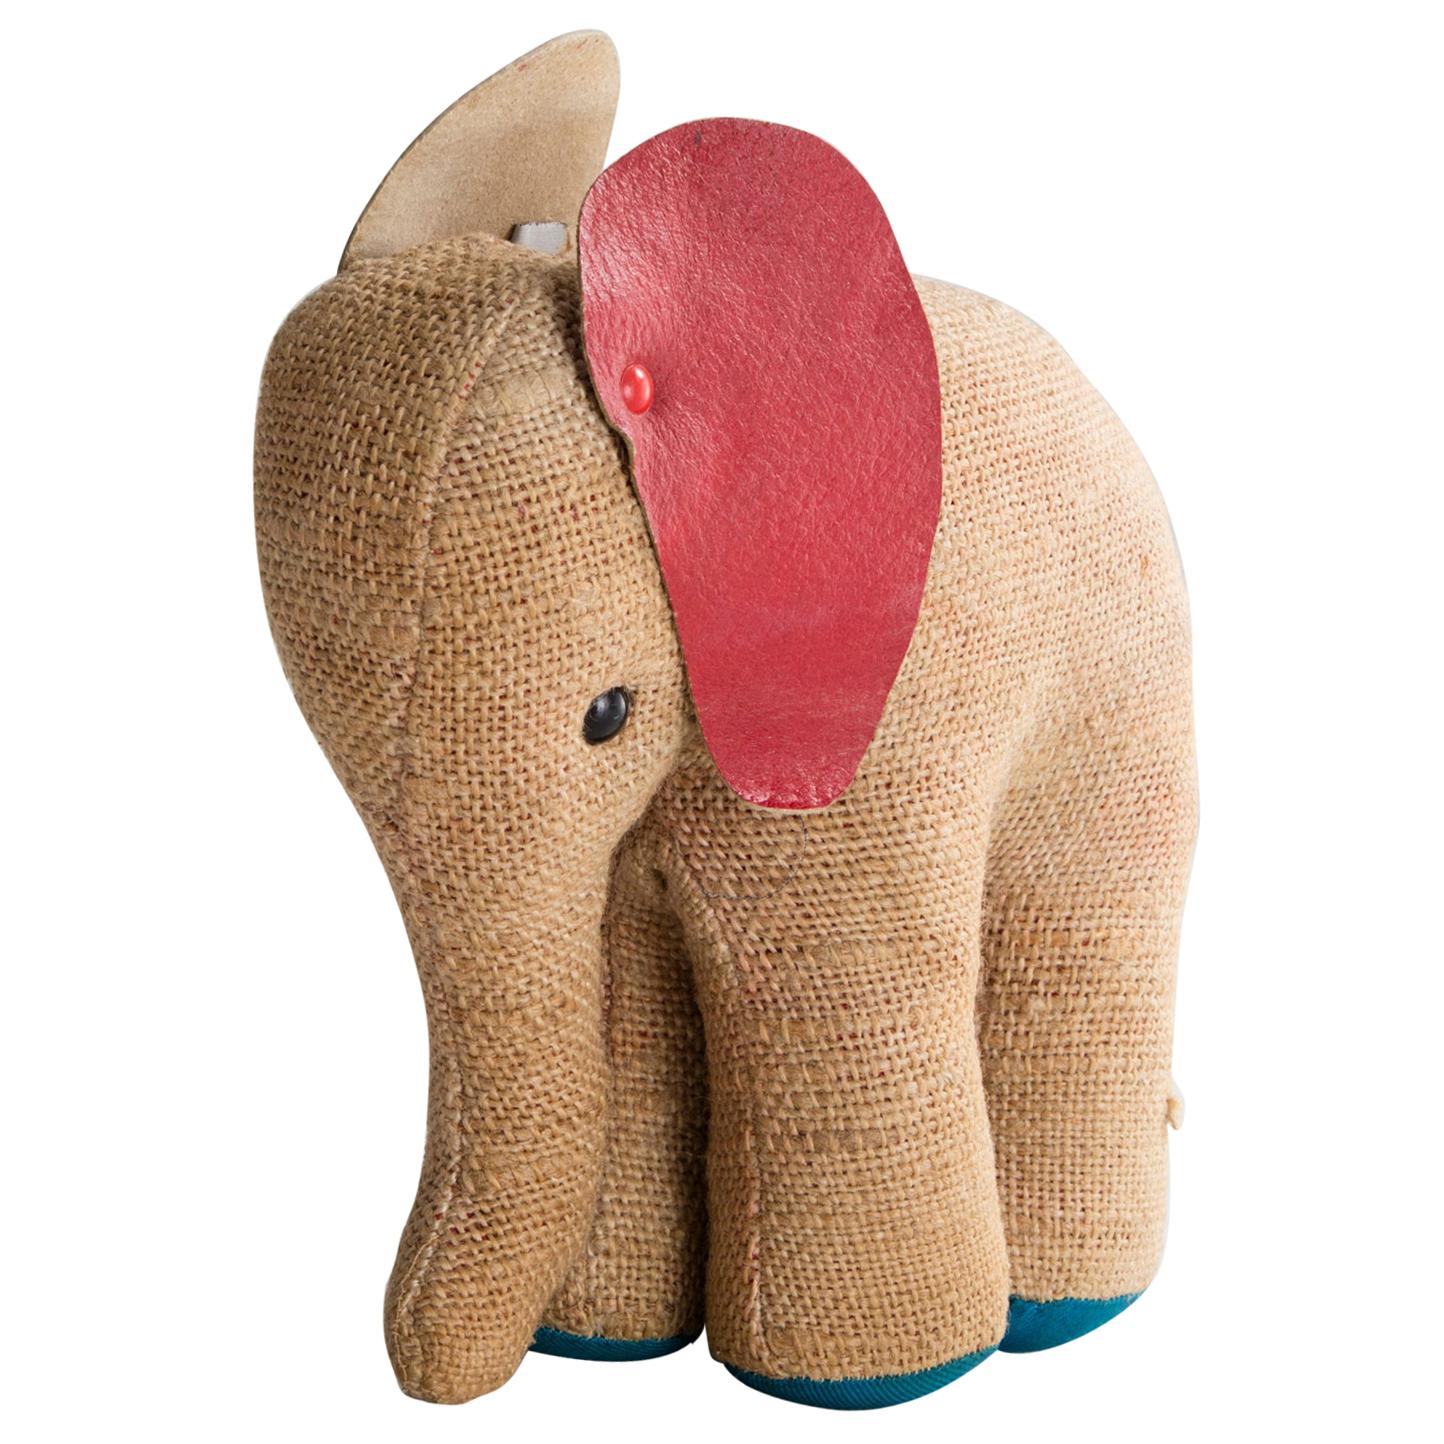 Therapeutic Small Elephant Toy in Jute and Leather by Renate Müller, circa 1969 For Sale